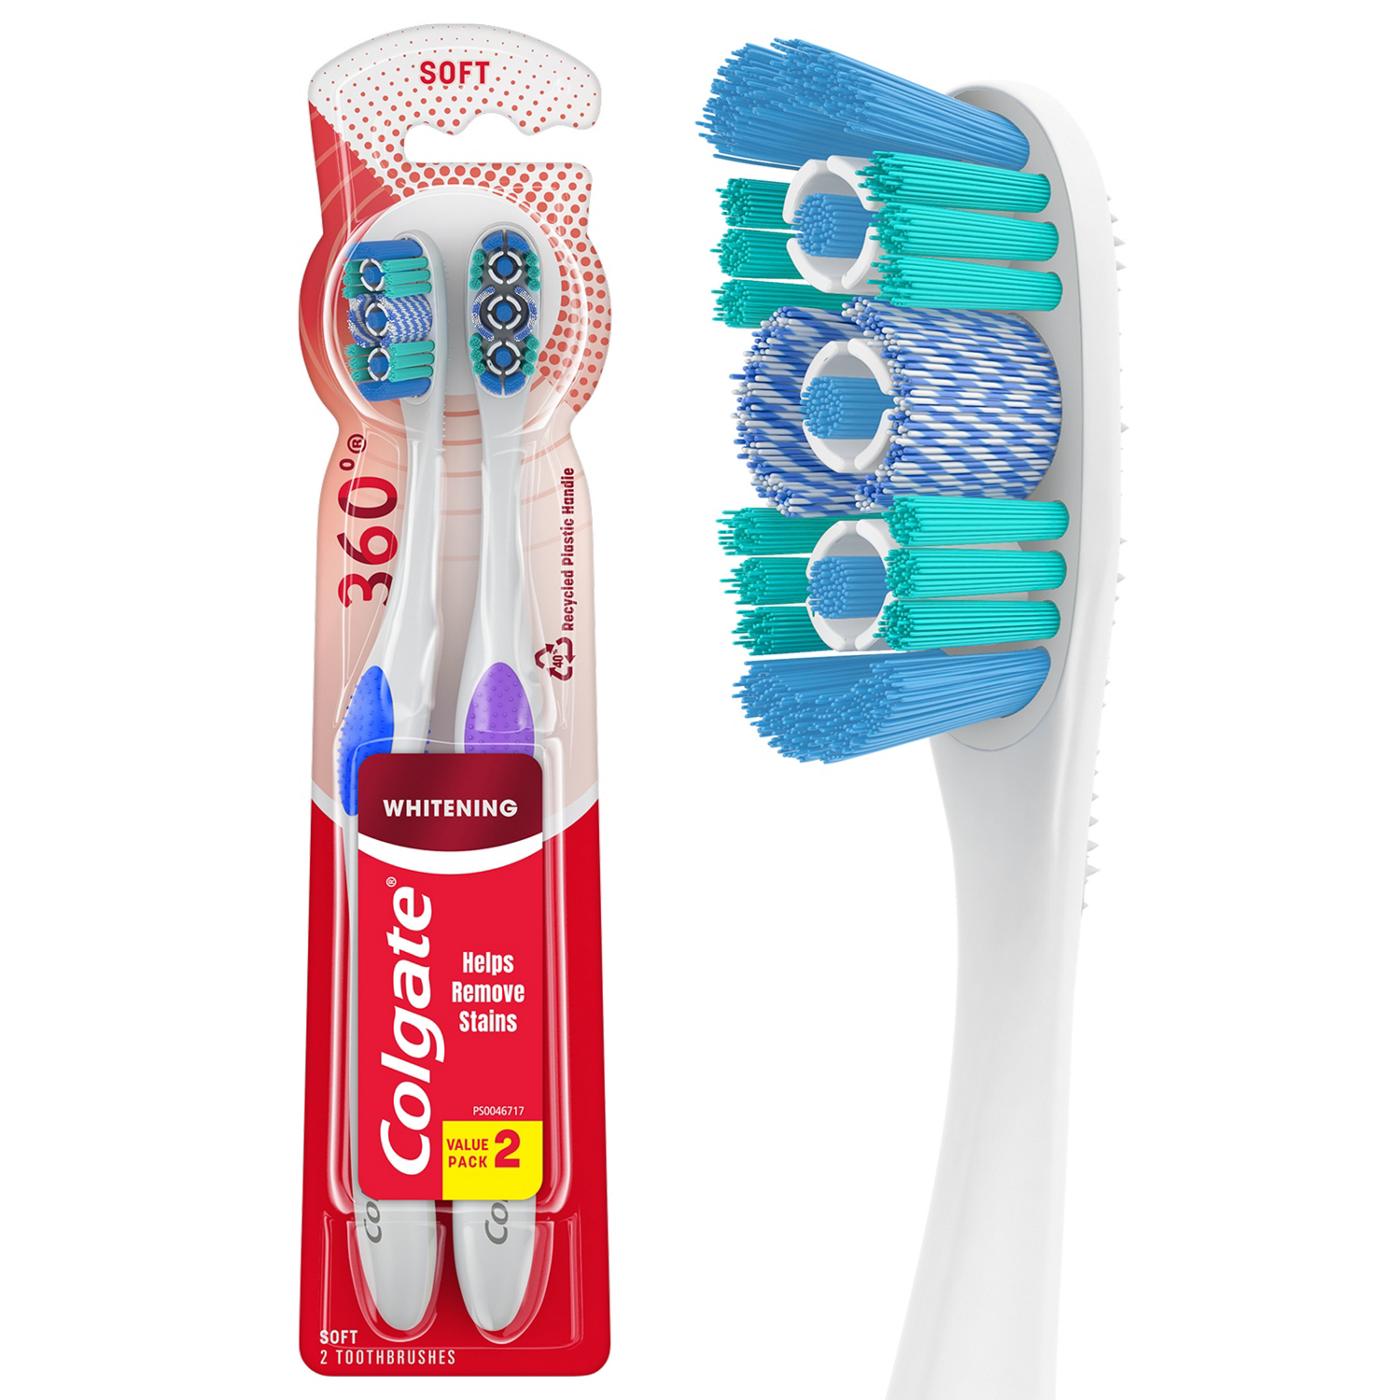 Colgate 360 Optic White Toothbrushes - Soft; image 8 of 11